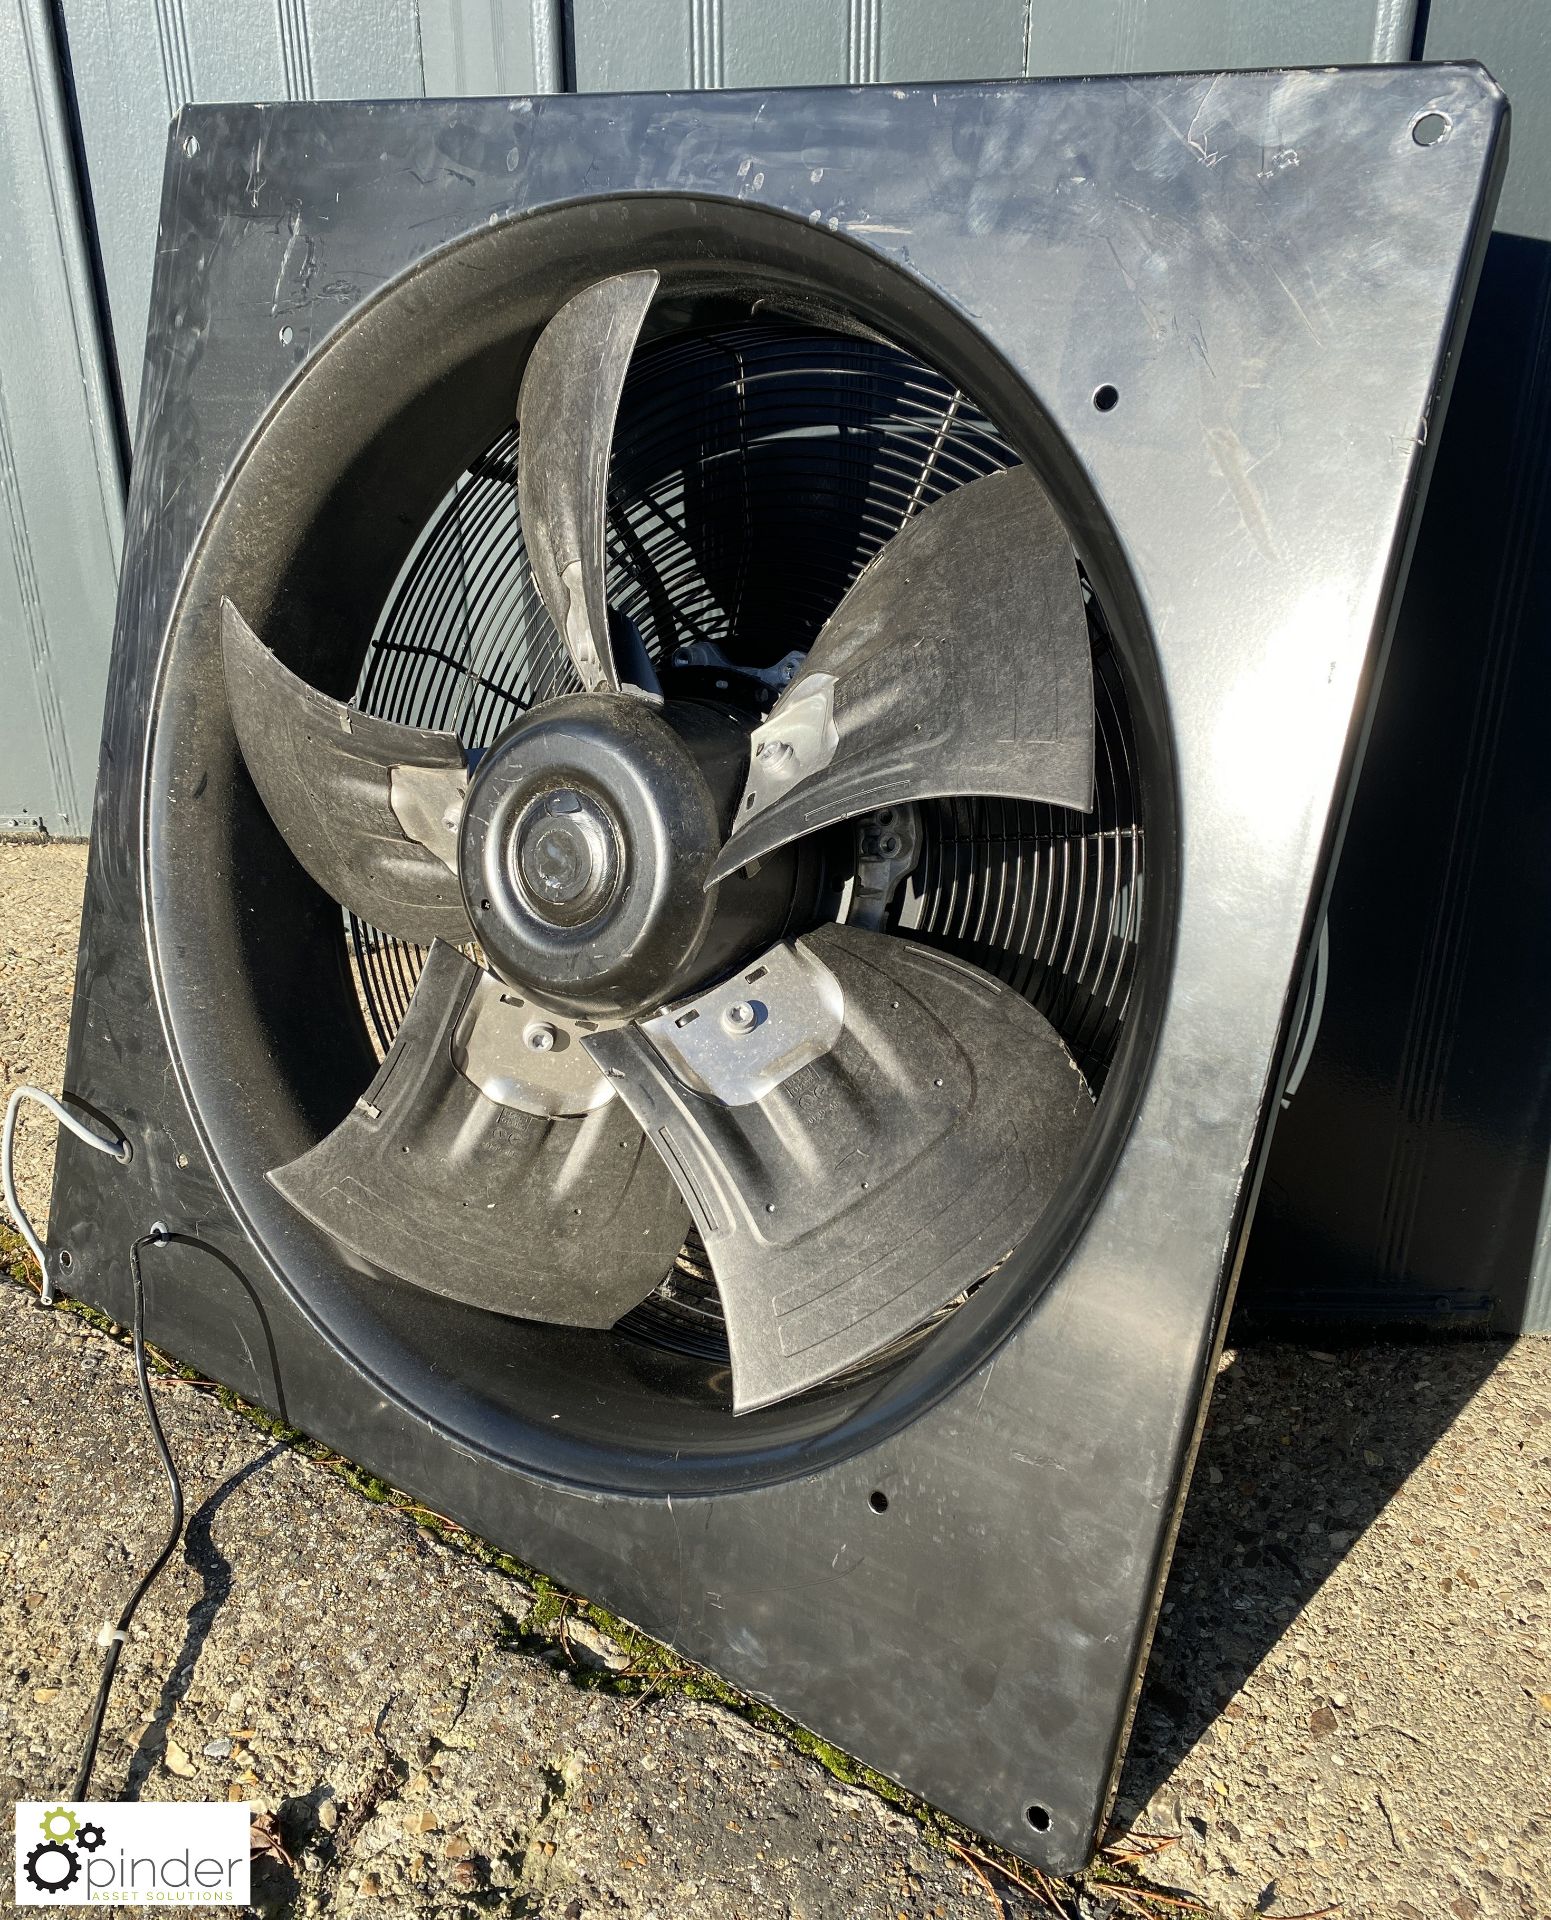 2 Embpapst W3G630-GU23-01 square plate Axial Fans, 630mm (LOCATION: Corby) - Image 4 of 7